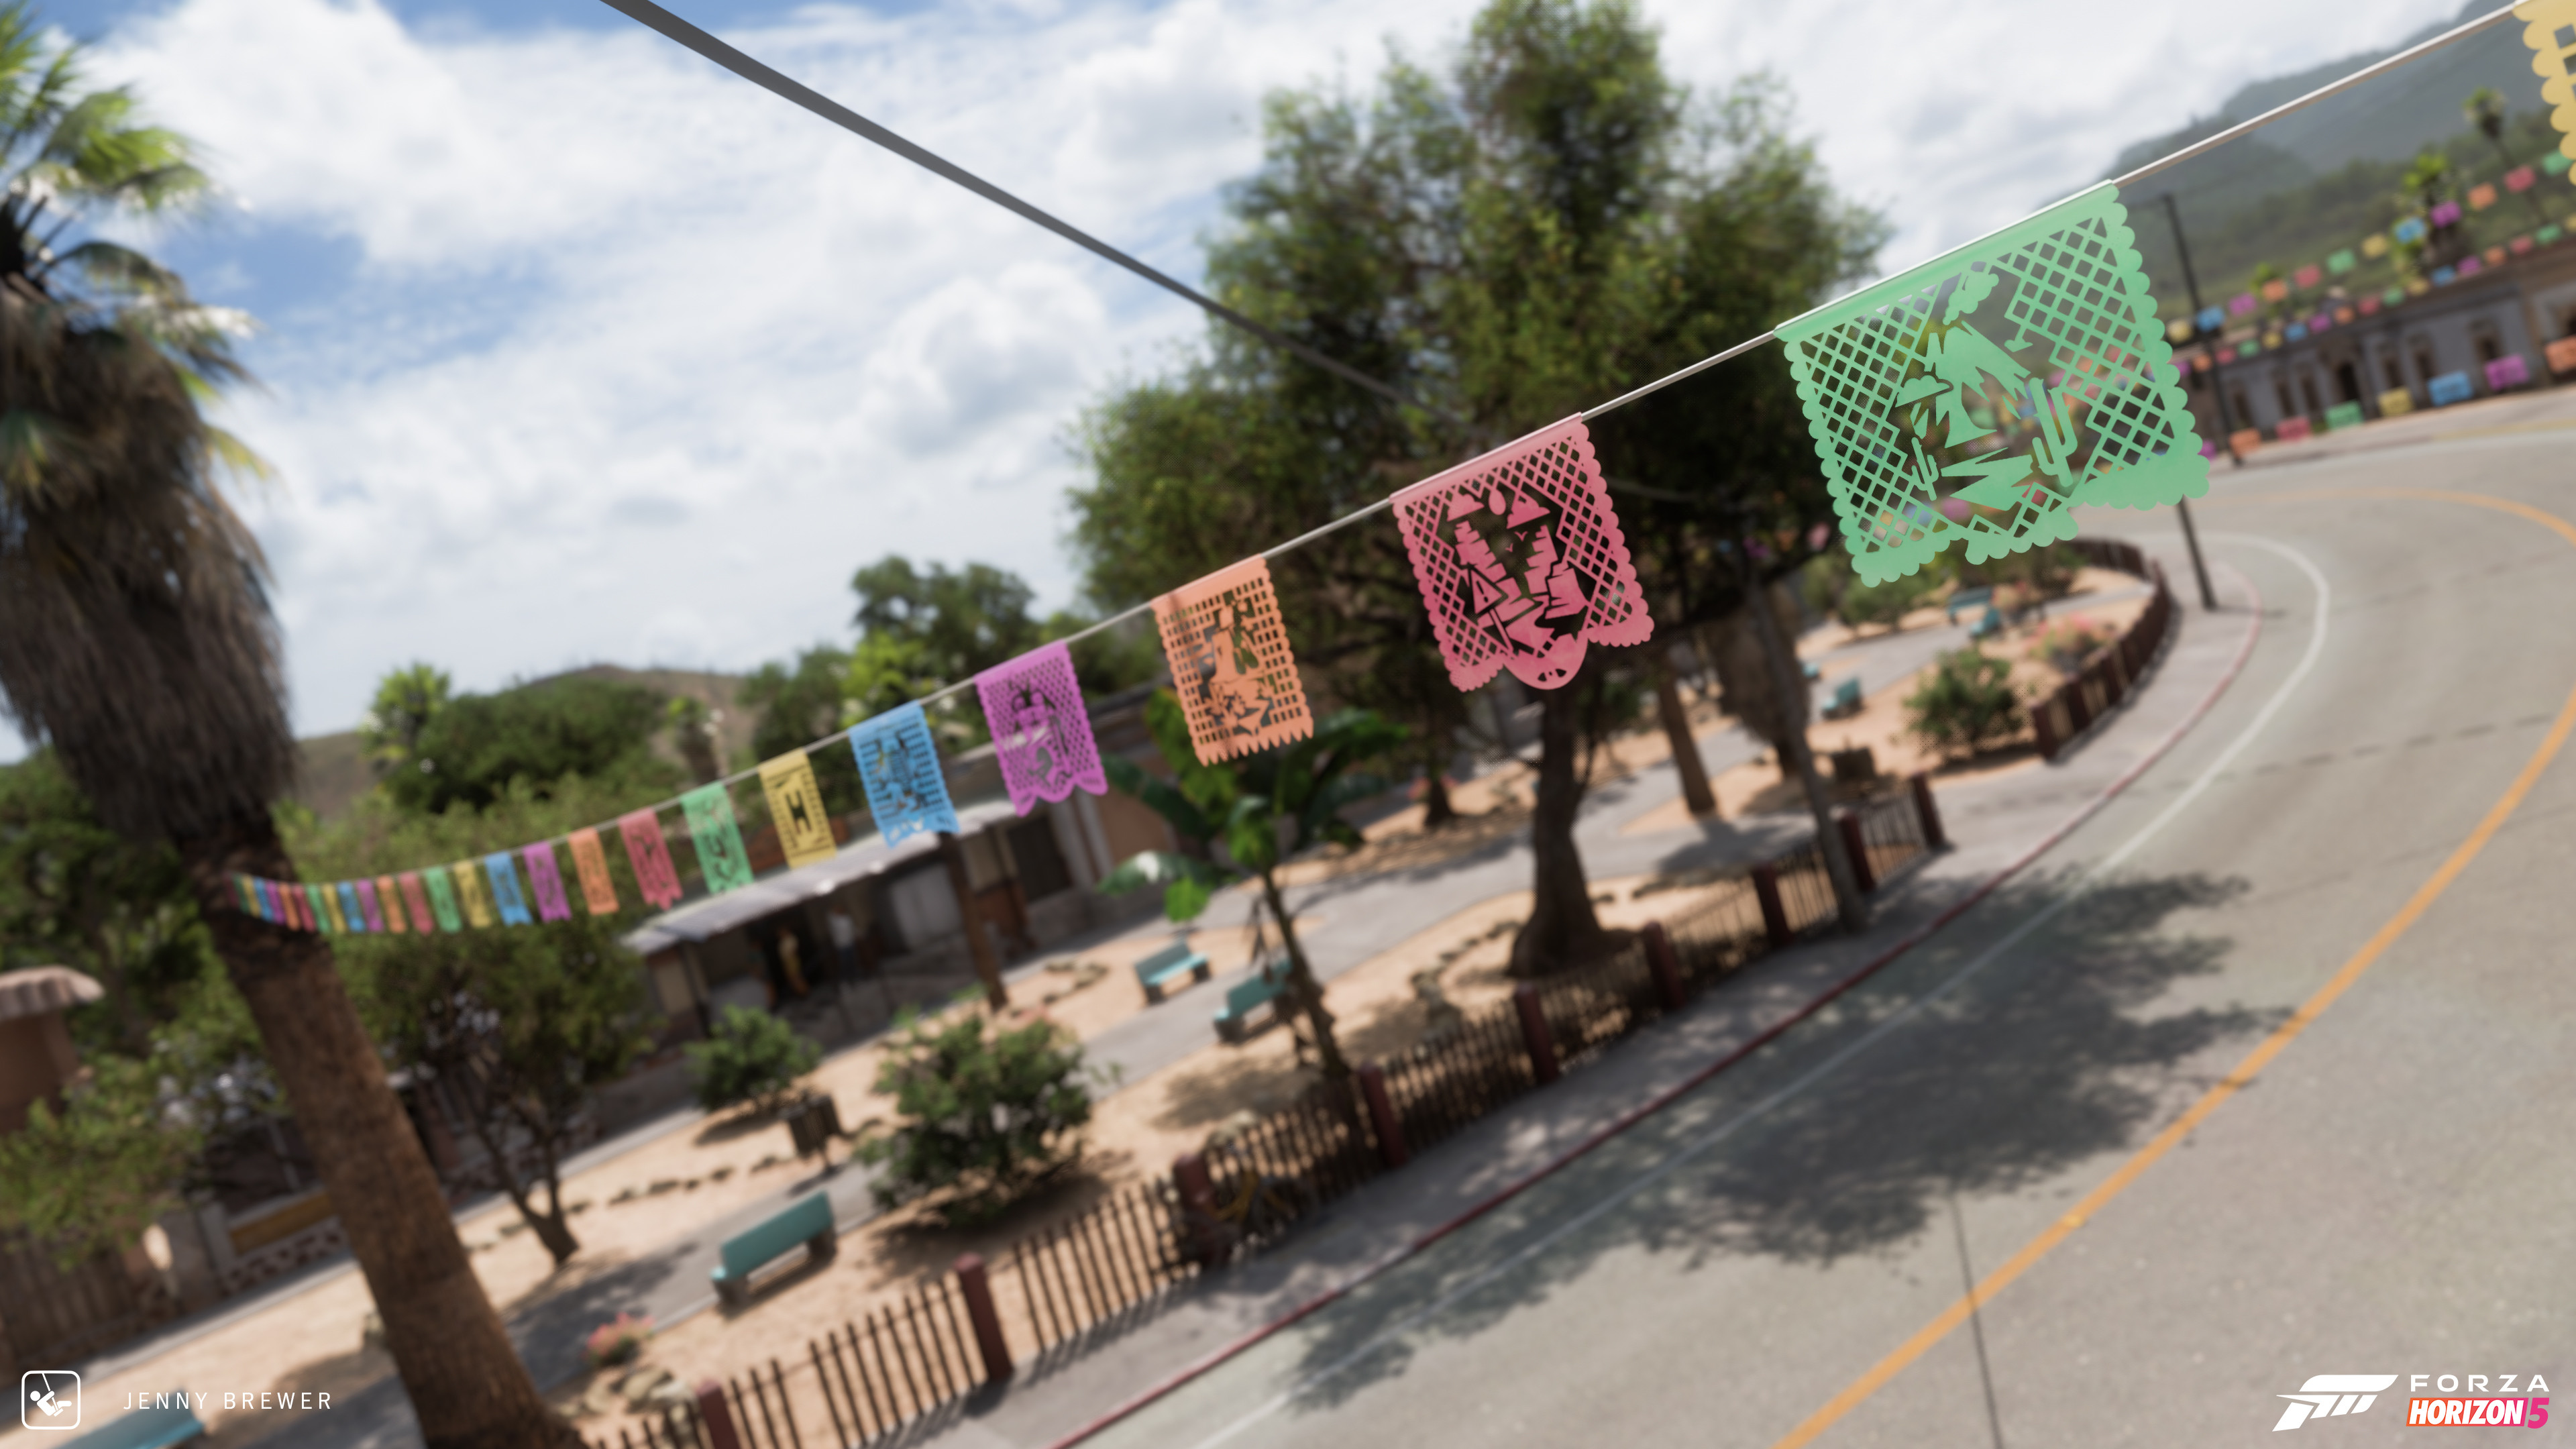 My designs were also used on the papel picado flags.